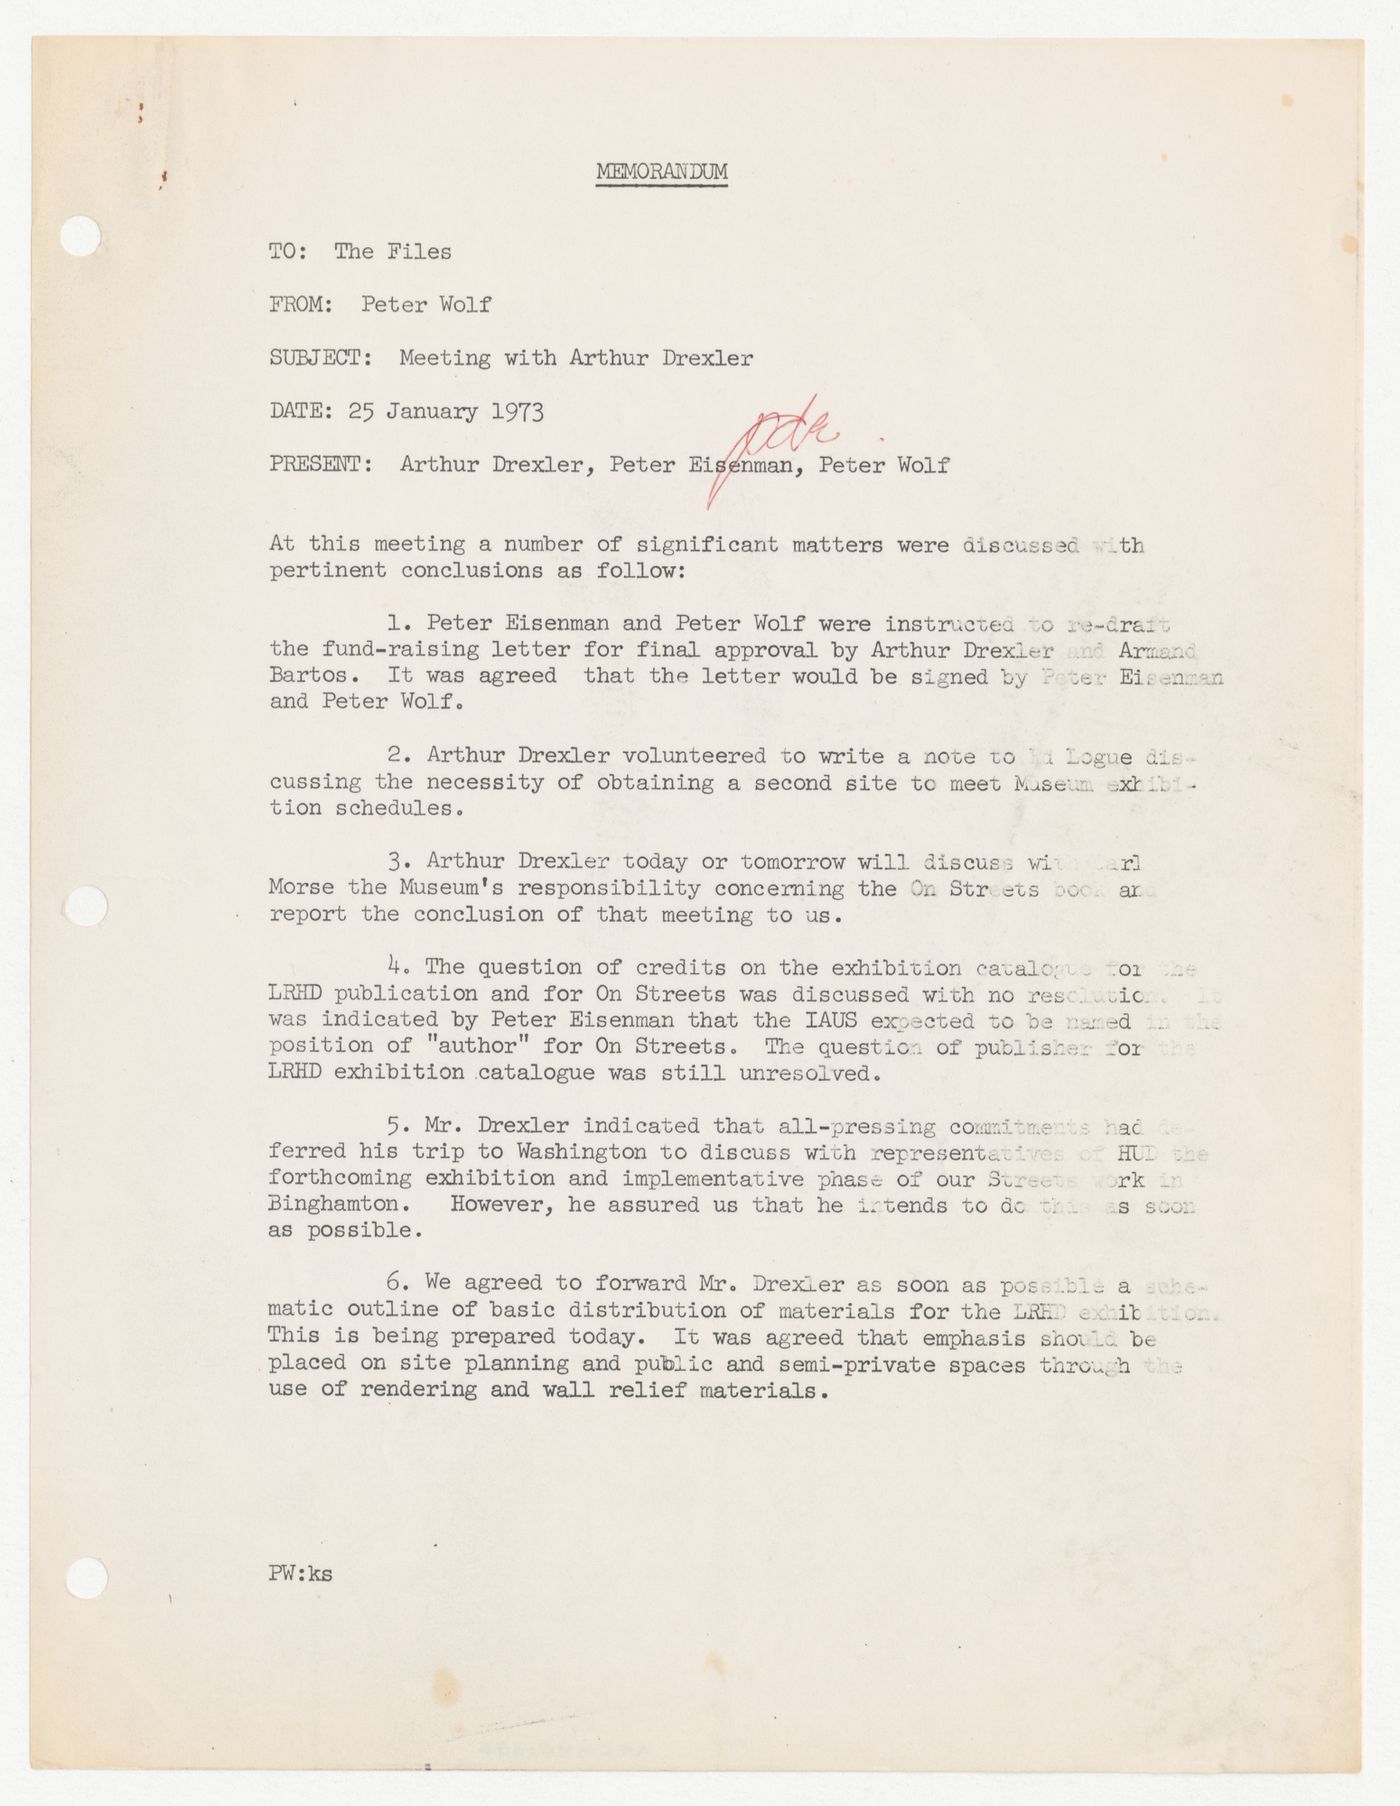 Memorandum from Peter Wolf to The Files about meeting with Arthur Drexler